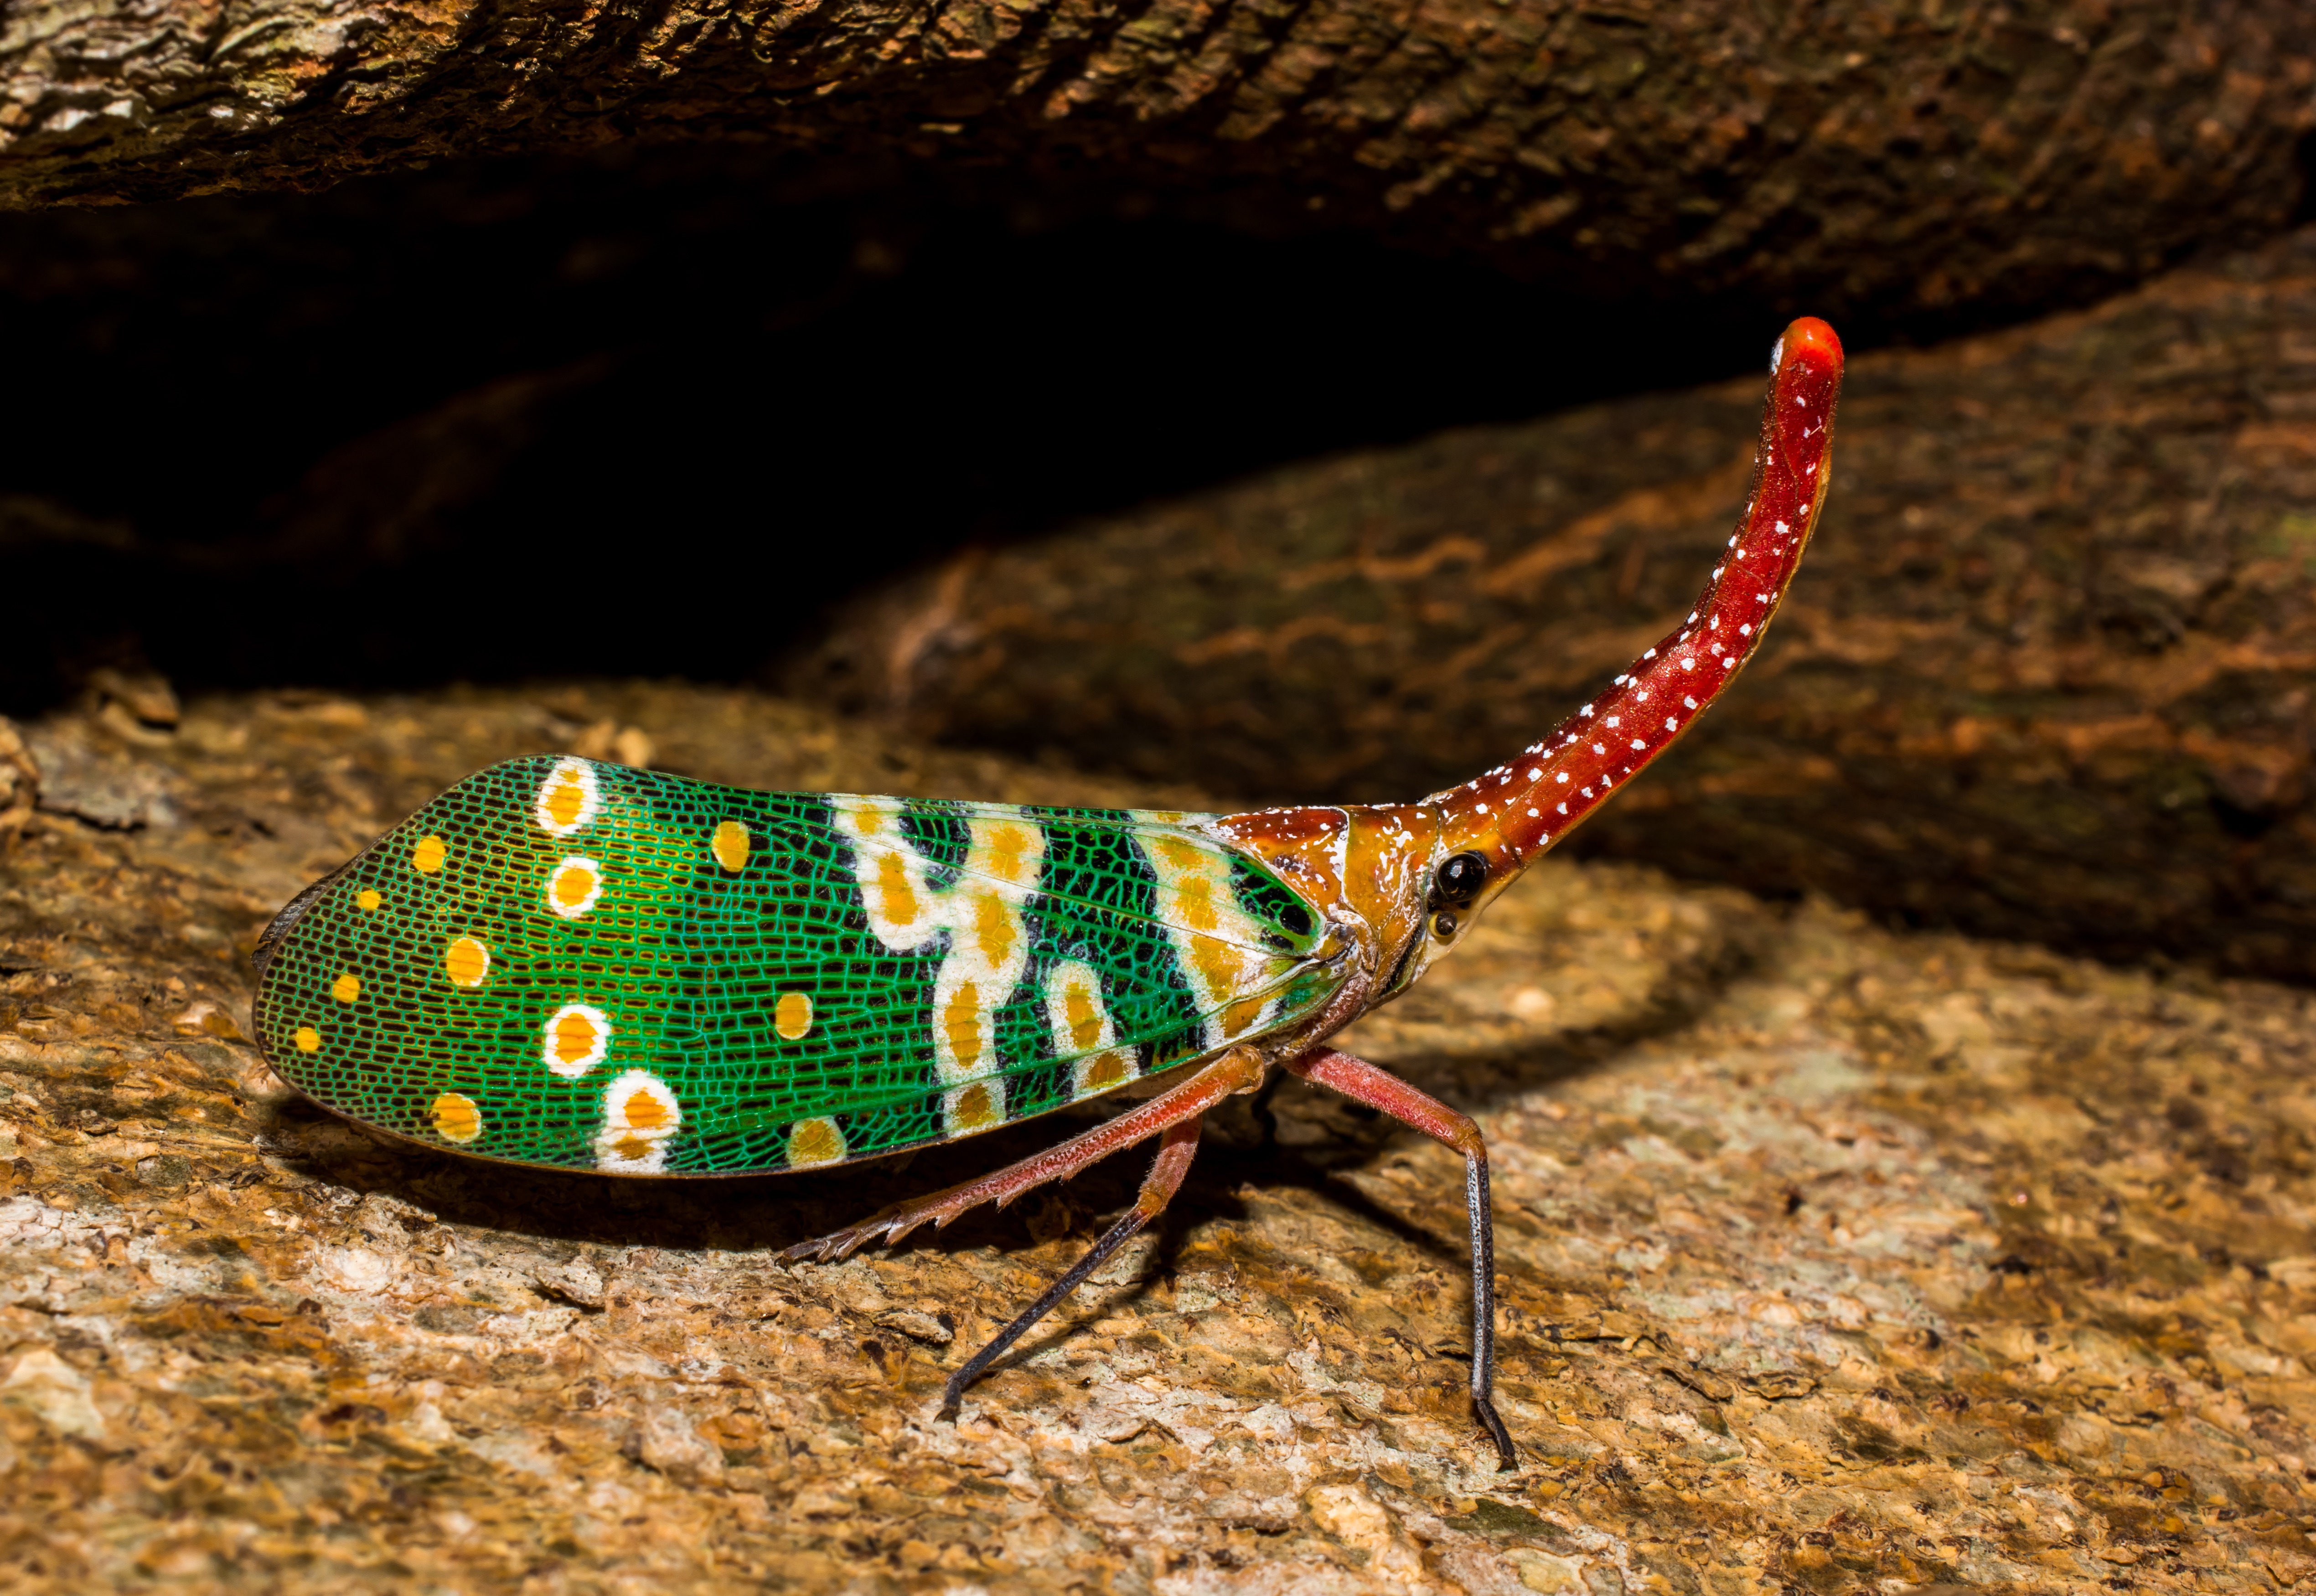 Pyrops candelaria - Laternaria candelaria also called the Spotted lanternfly by Josch13